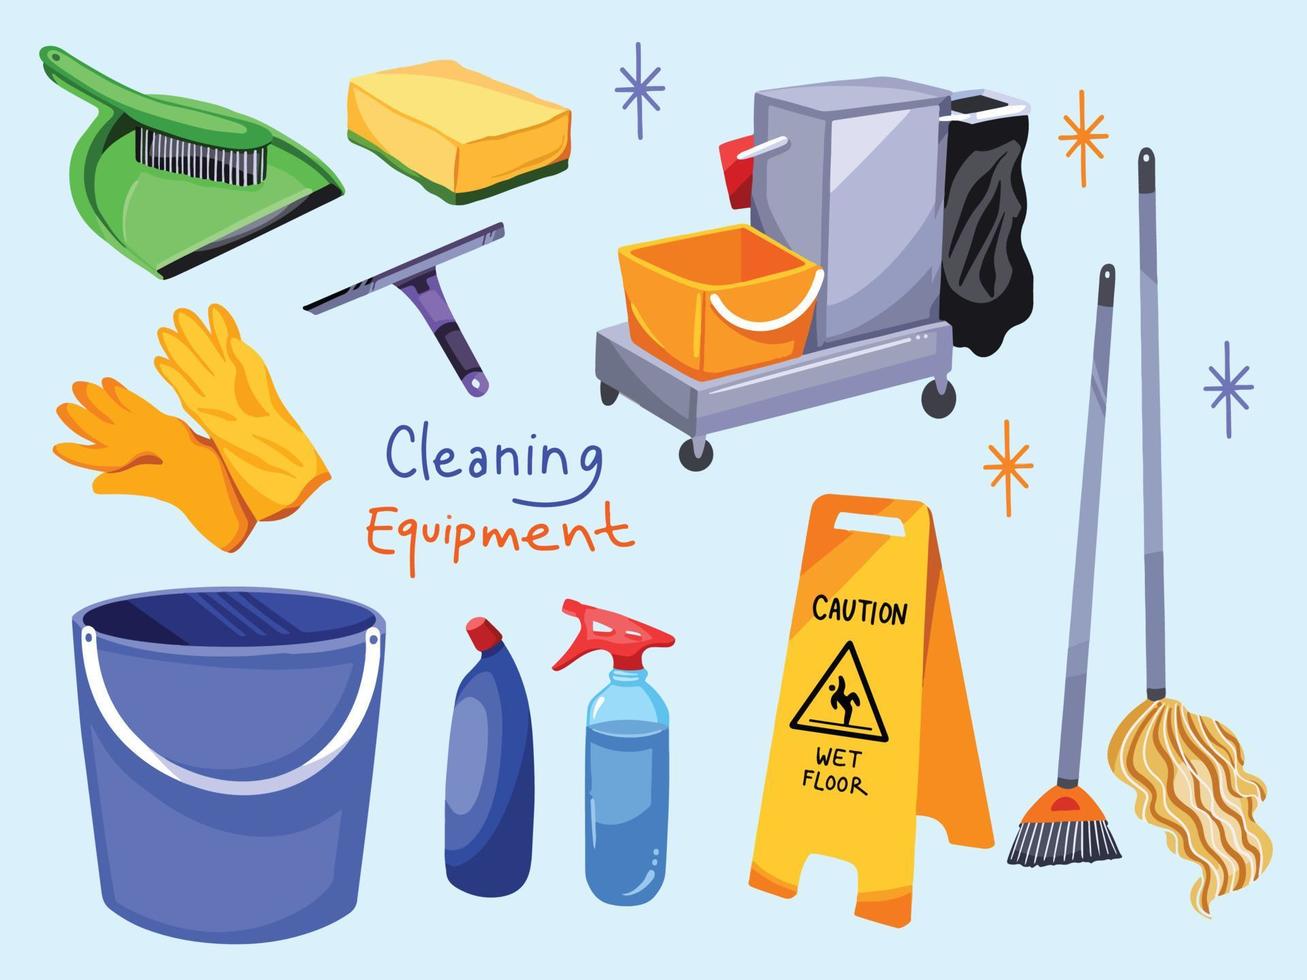 Cleaning service job equipment set collection vector illustration with cartoon flat art style drawing. From broom, gloves, sponge, spray bottle, and others.